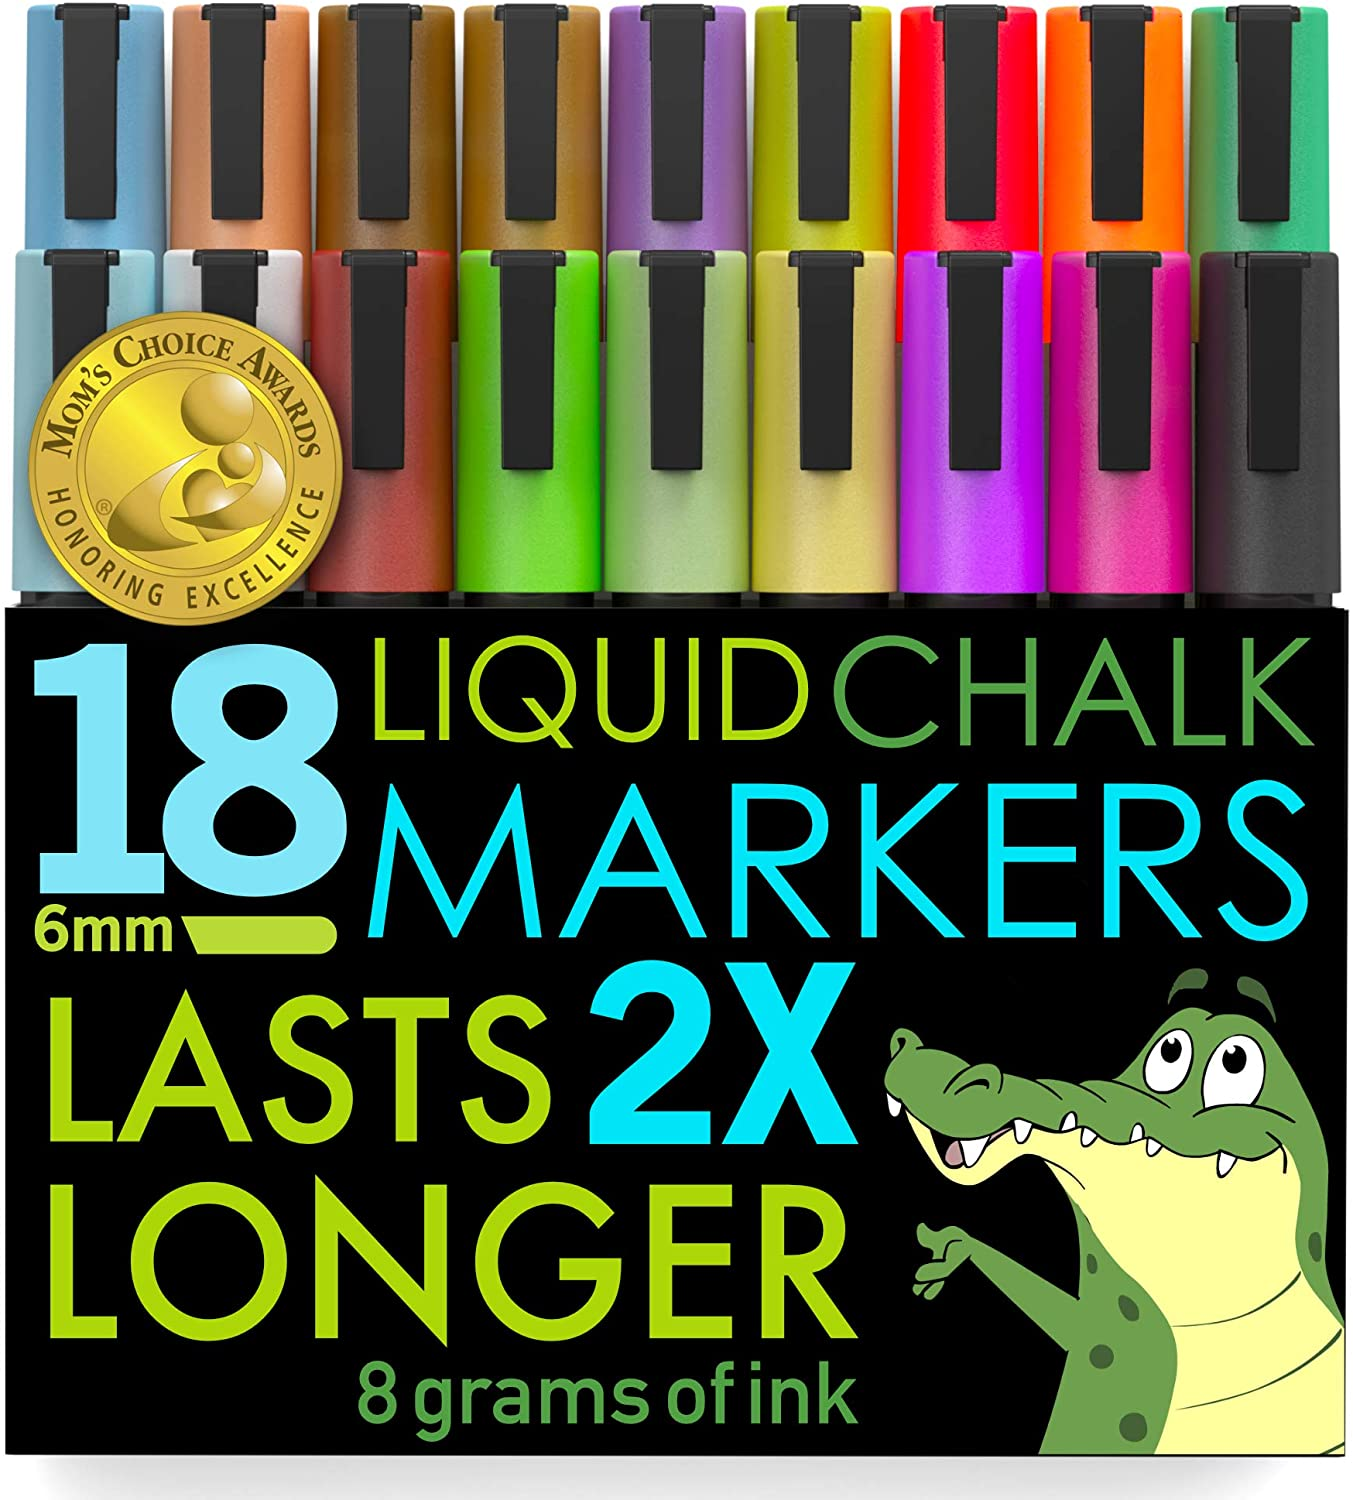 Liquid Chalk Markers, Jumbo 18 Pack, (Mom’S Choice Award Gold Recipient), Neon plus Earth Colors 6Mm Reversible Tip, 2 Replacement Tips Included